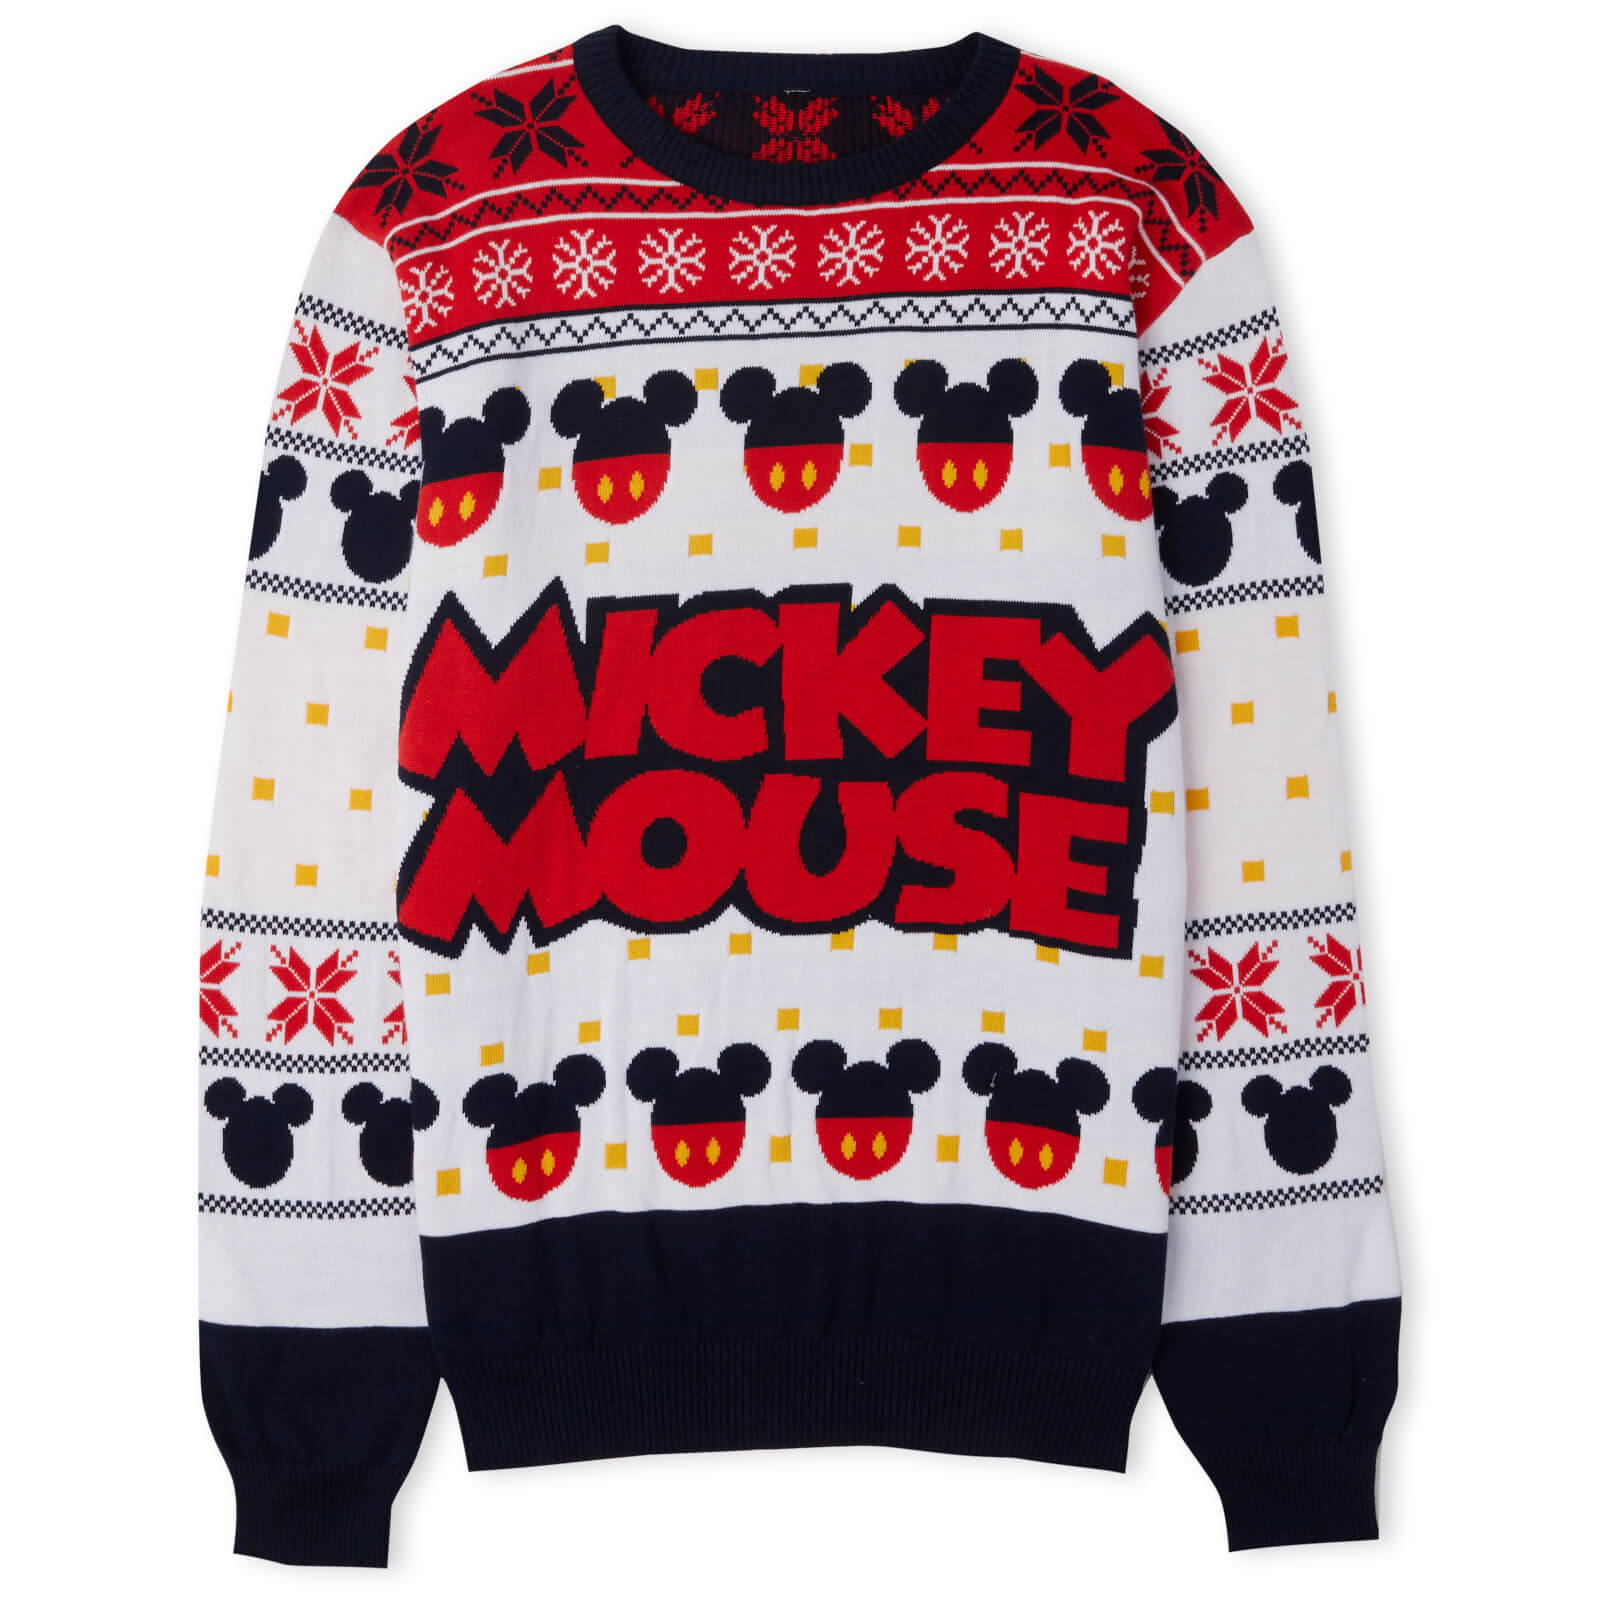 Mickey Mouse Christmas Knitted Jumper White - L